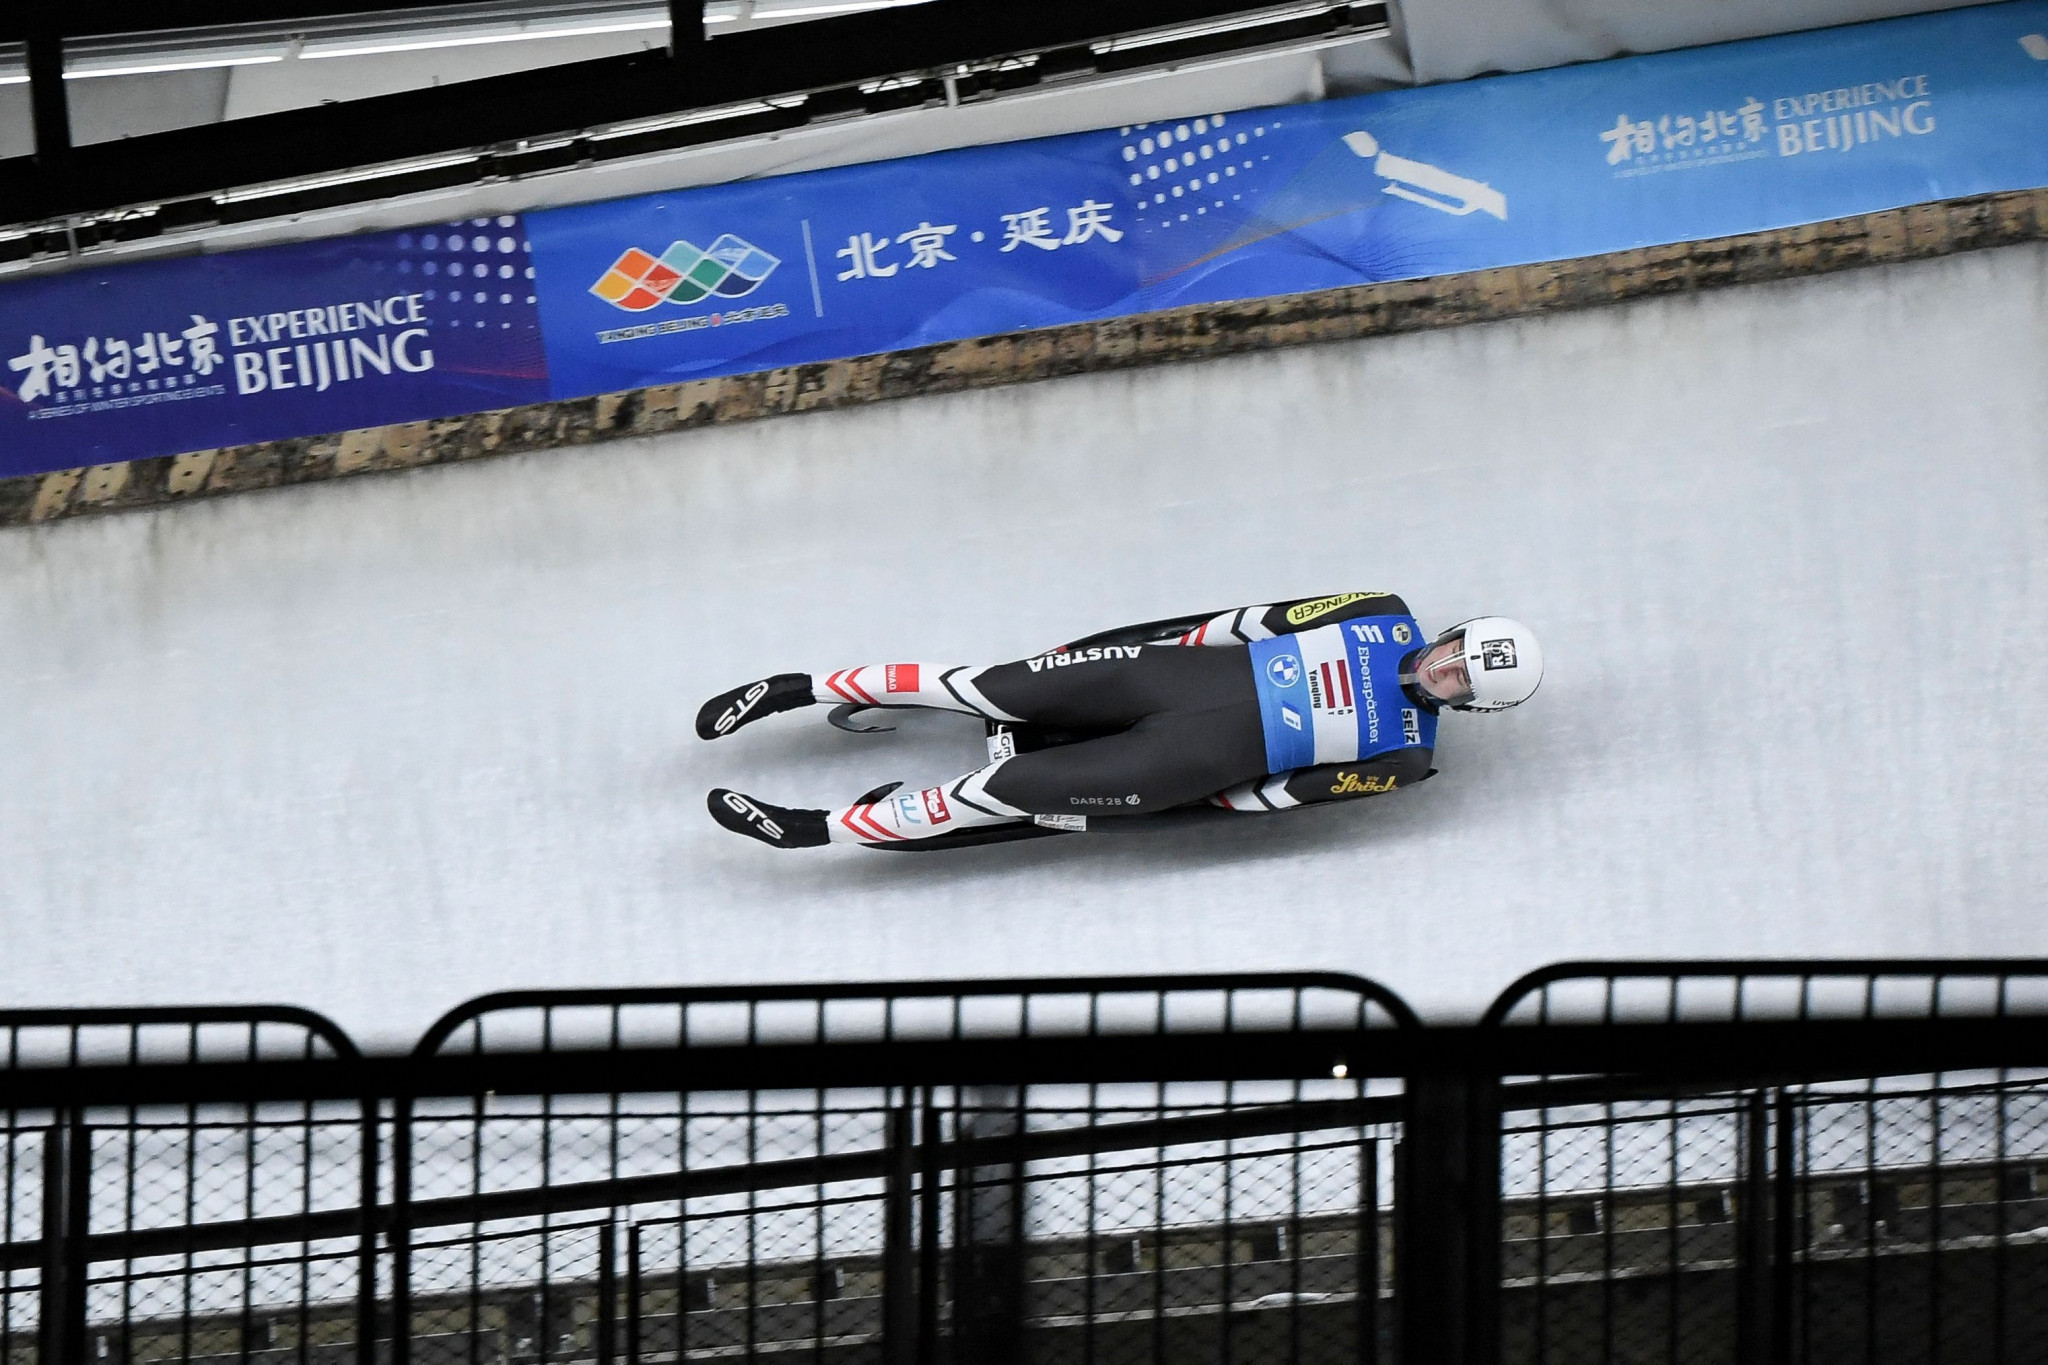 The National Sliding Centre is located close to the Yanqing Olympic and Paralympic Village ©Getty Images